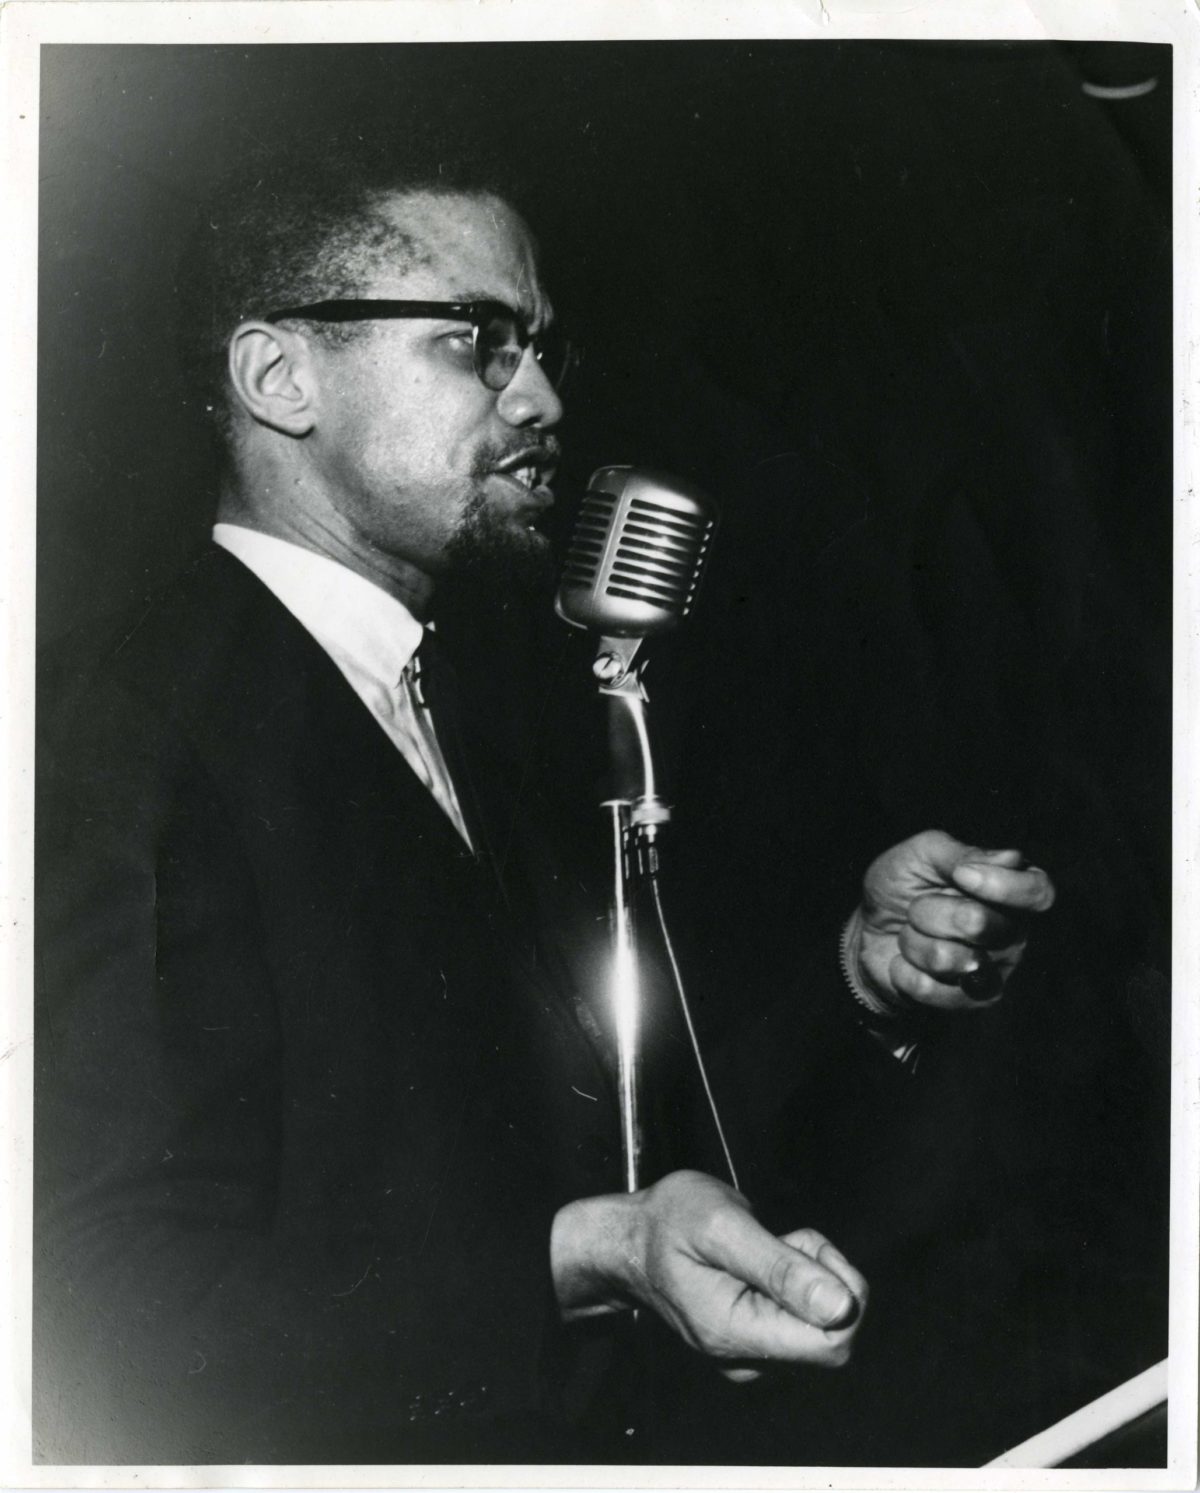 Malcolm X speaks at a microphone